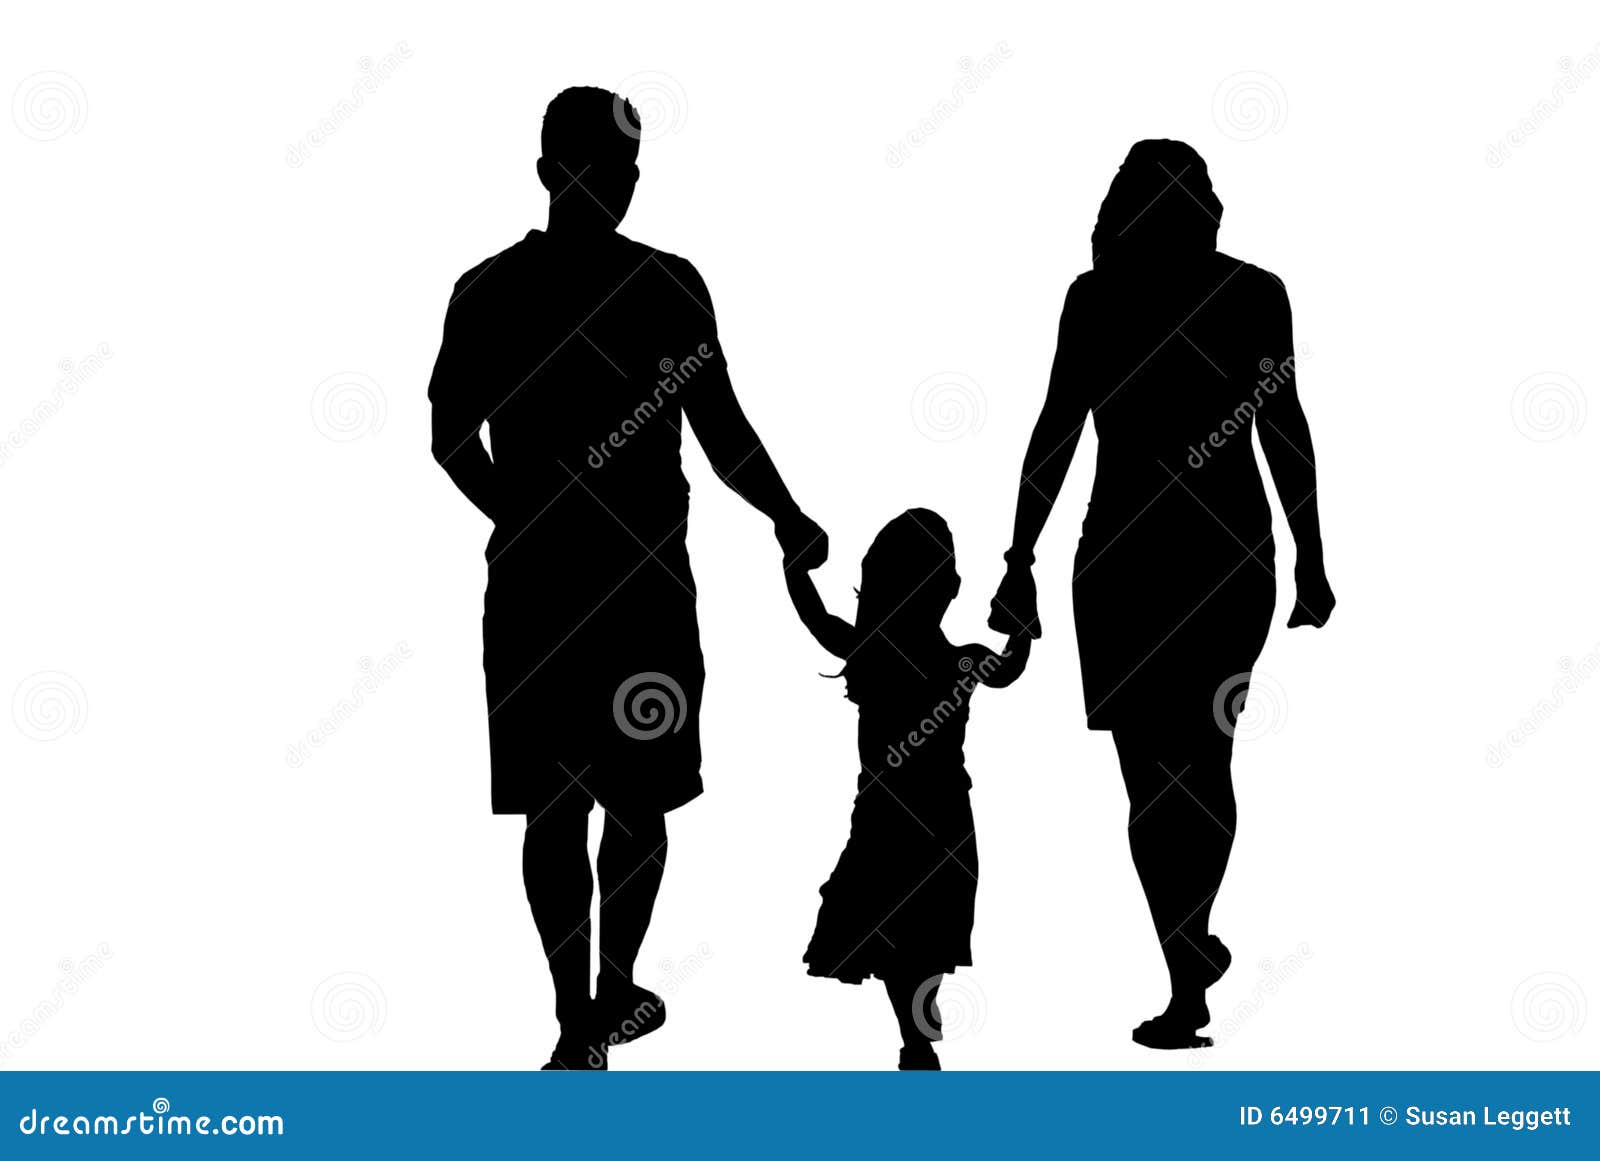 Silhouette of Family stock image Image of walking